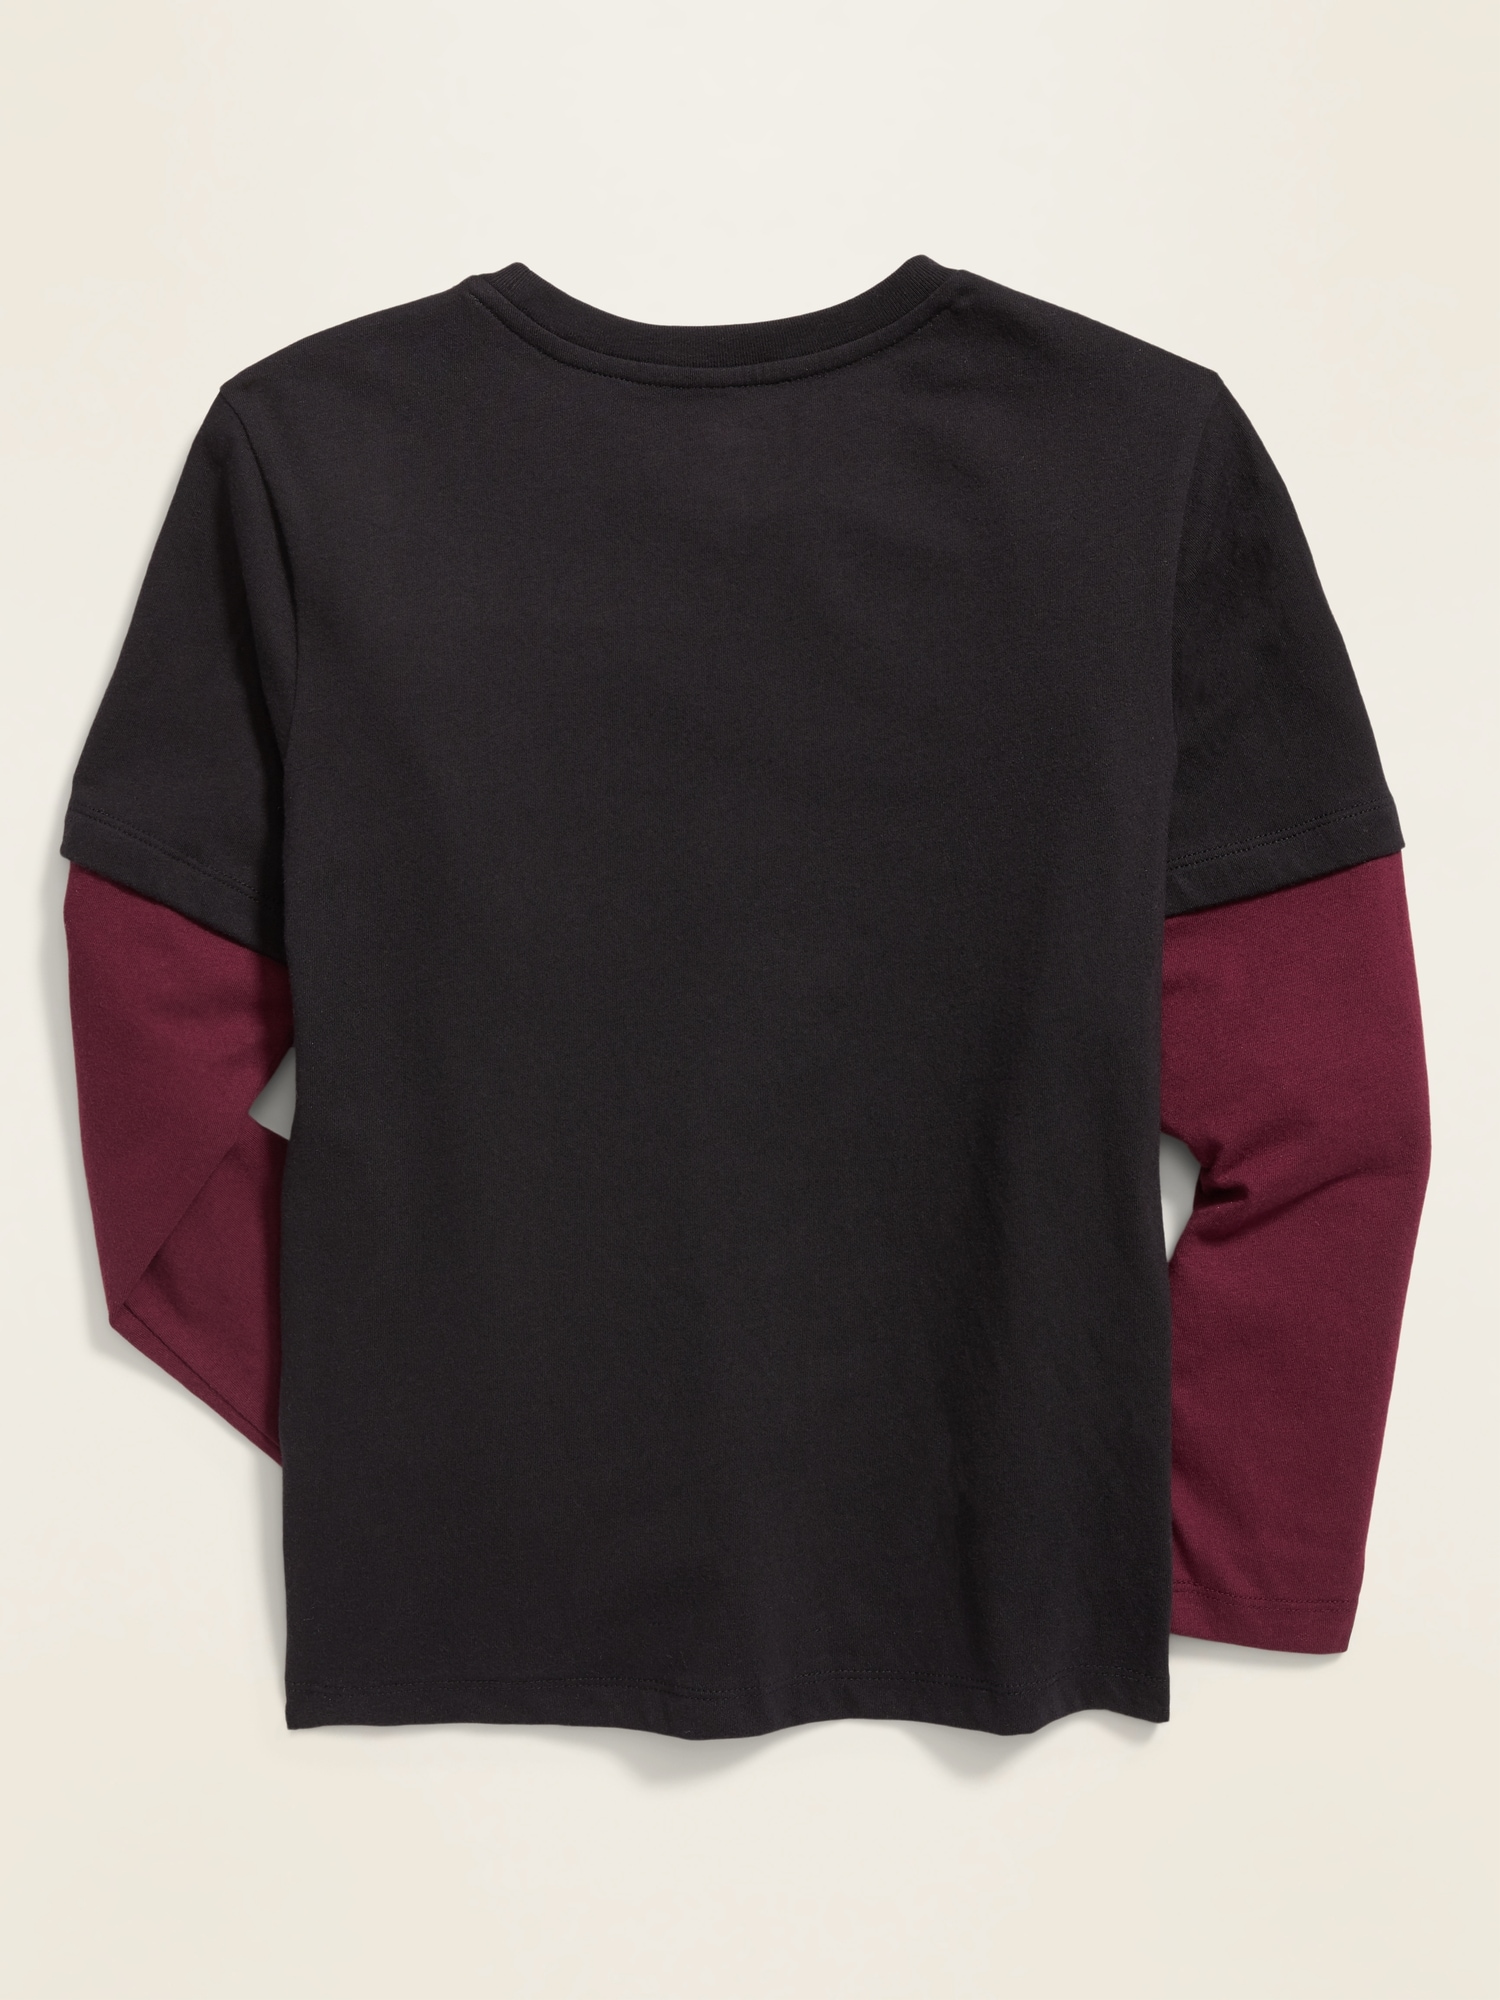 2-In-1 Graphic Crew-Neck Tee For Boys | Old Navy